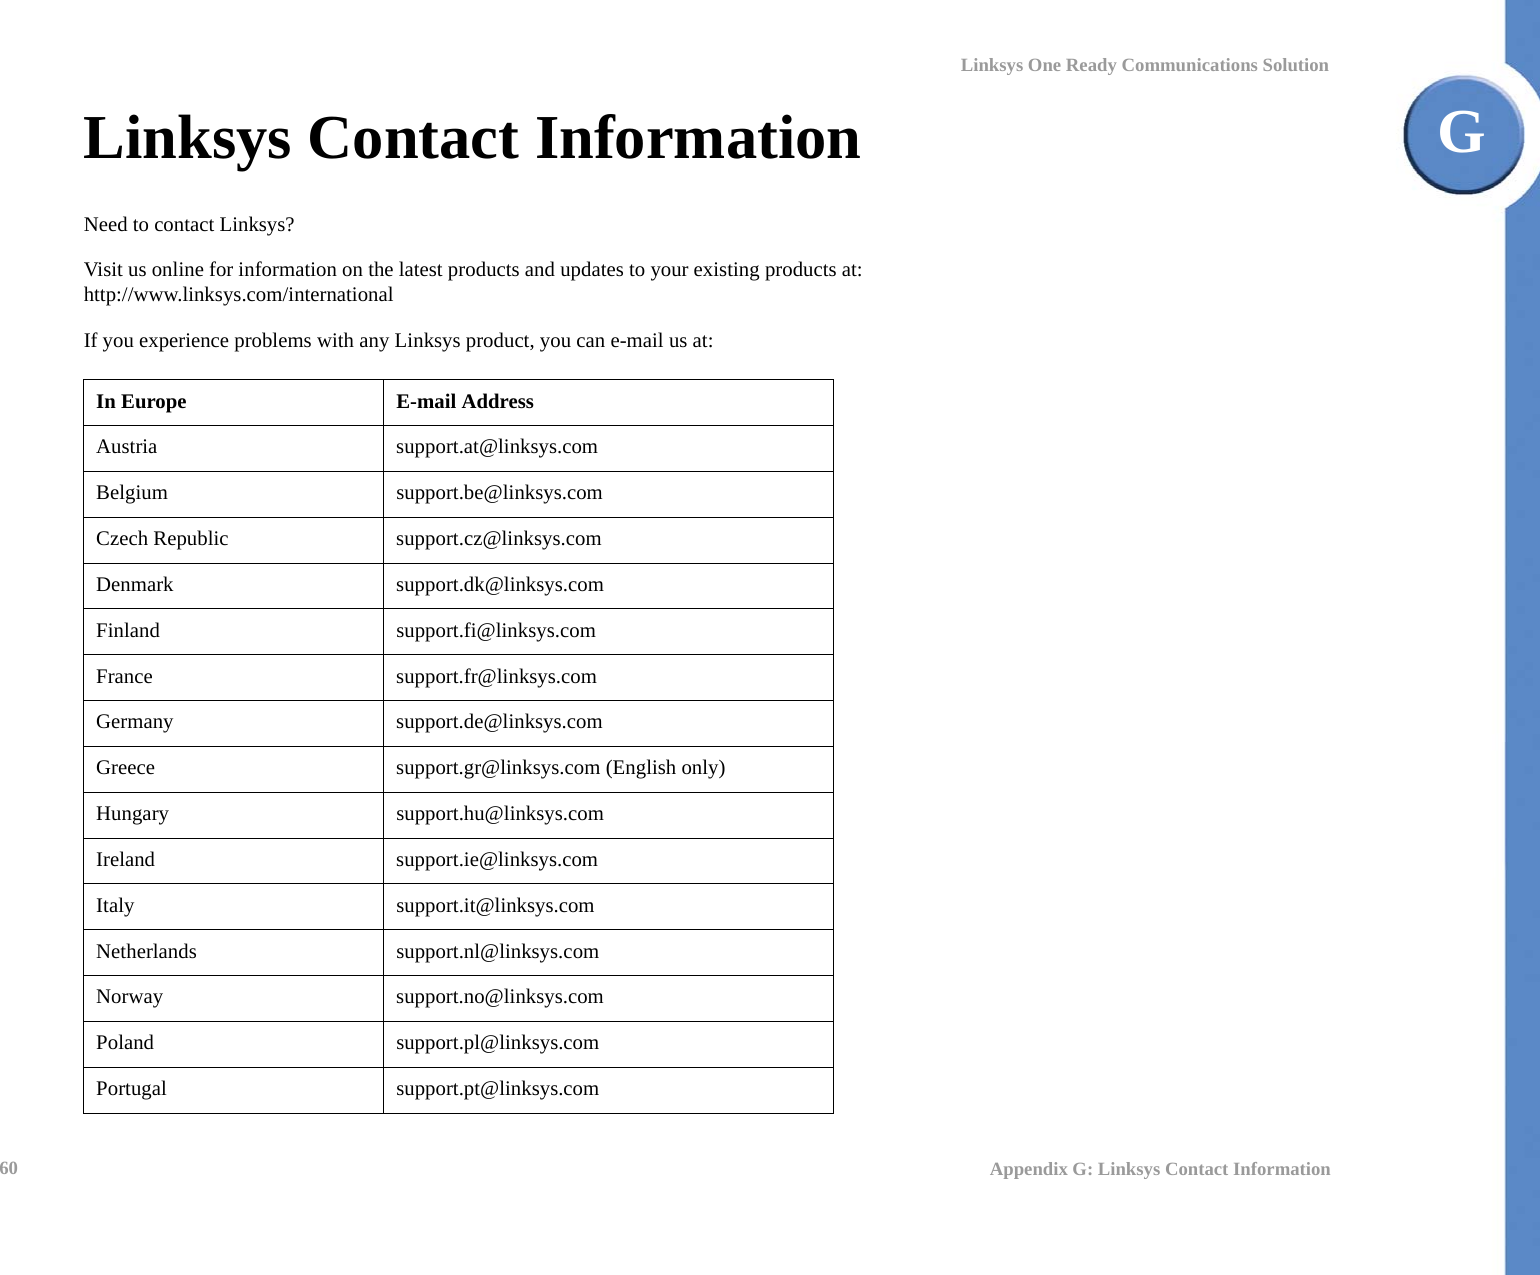 60 Appendix G: Linksys Contact InformationLinksys One Ready Communications SolutionGLinksys Contact InformationNeed to contact Linksys?Visit us online for information on the latest products and updates to your existing products at: http://www.linksys.com/internationalIf you experience problems with any Linksys product, you can e-mail us at:In Europe E-mail AddressAustria support.at@linksys.comBelgium support.be@linksys.comCzech Republic support.cz@linksys.comDenmark support.dk@linksys.comFinland support.fi@linksys.comFrance support.fr@linksys.comGermany support.de@linksys.comGreece support.gr@linksys.com (English only)Hungary support.hu@linksys.comIreland support.ie@linksys.comItaly support.it@linksys.comNetherlands support.nl@linksys.comNorway support.no@linksys.comPoland support.pl@linksys.comPortugal support.pt@linksys.com